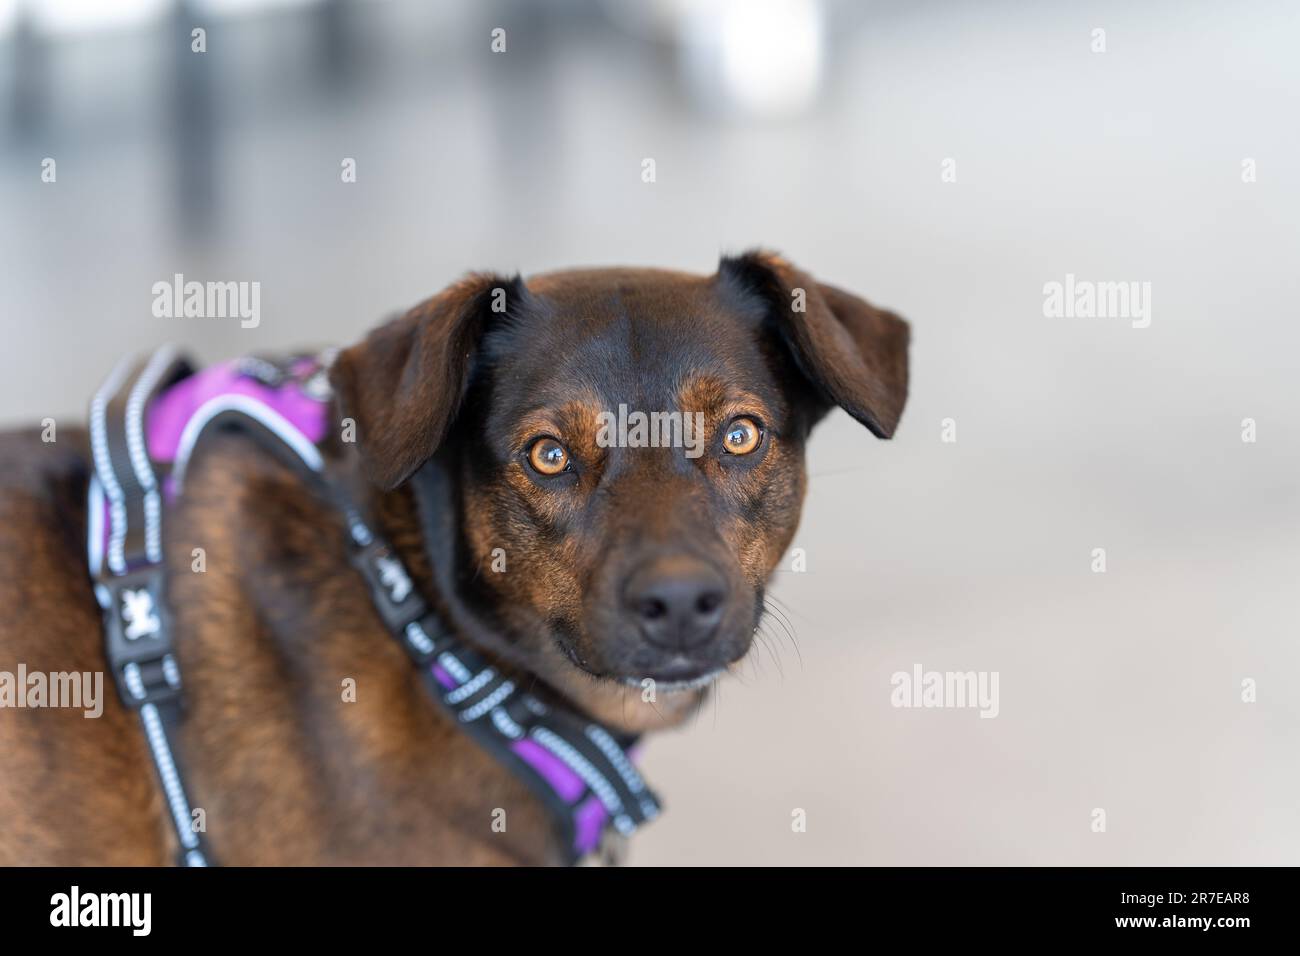 A hound dog wearing a purple collar and harness with its eyes closed Stock Photo